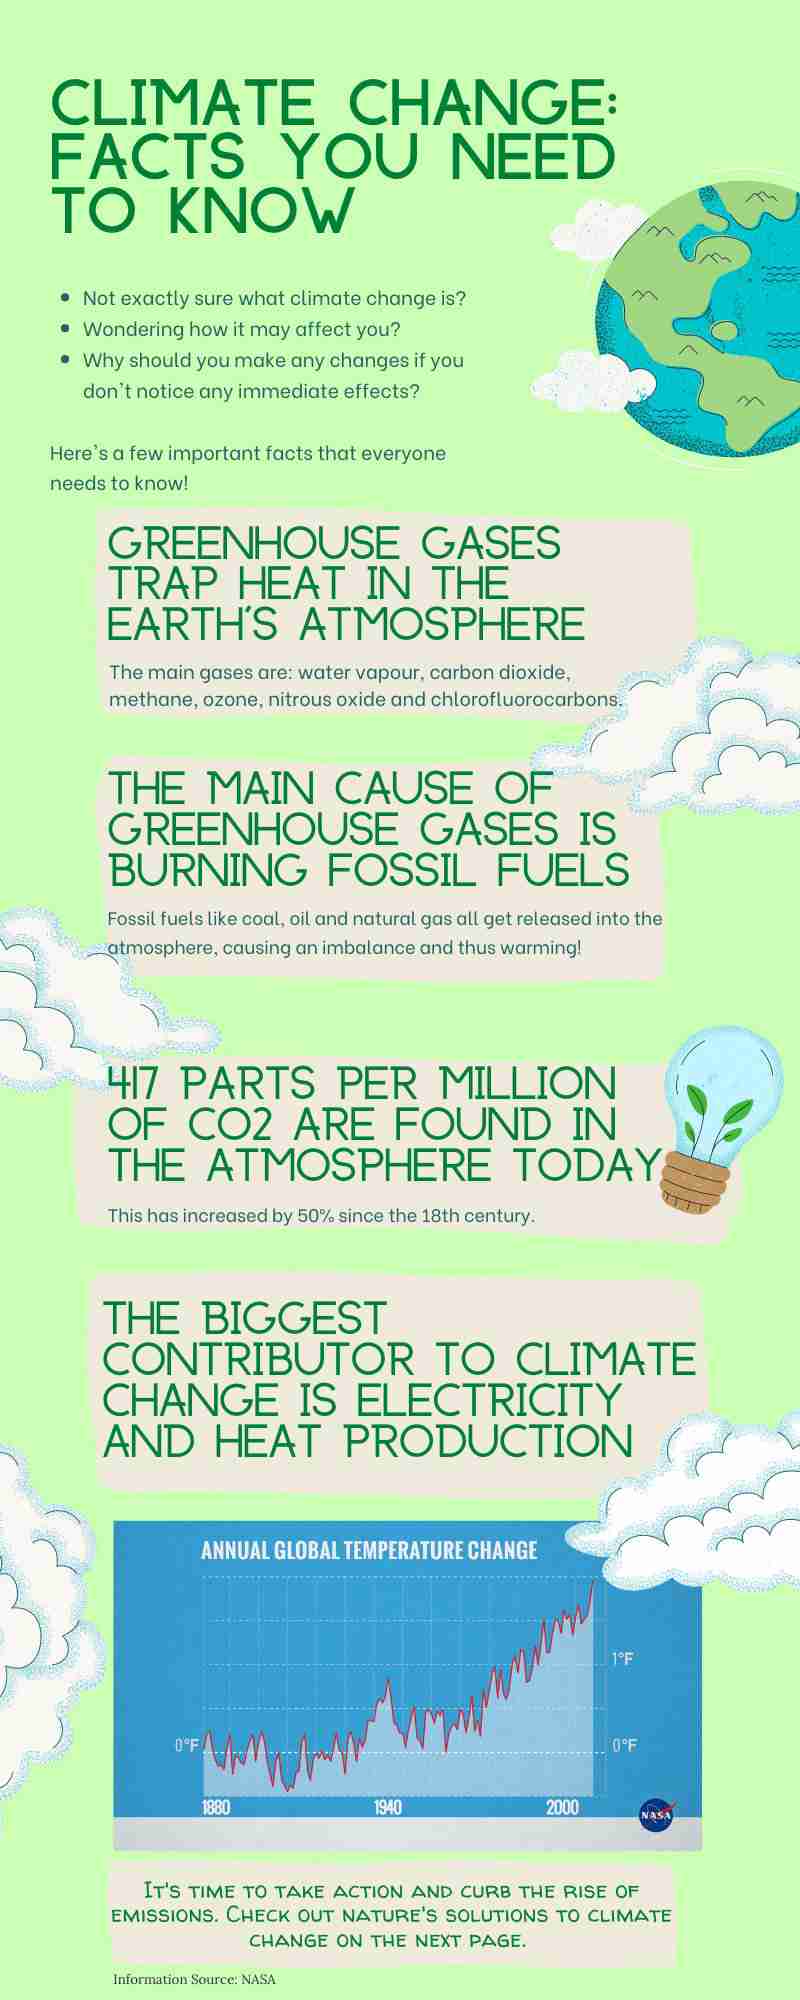 The facts about climate change